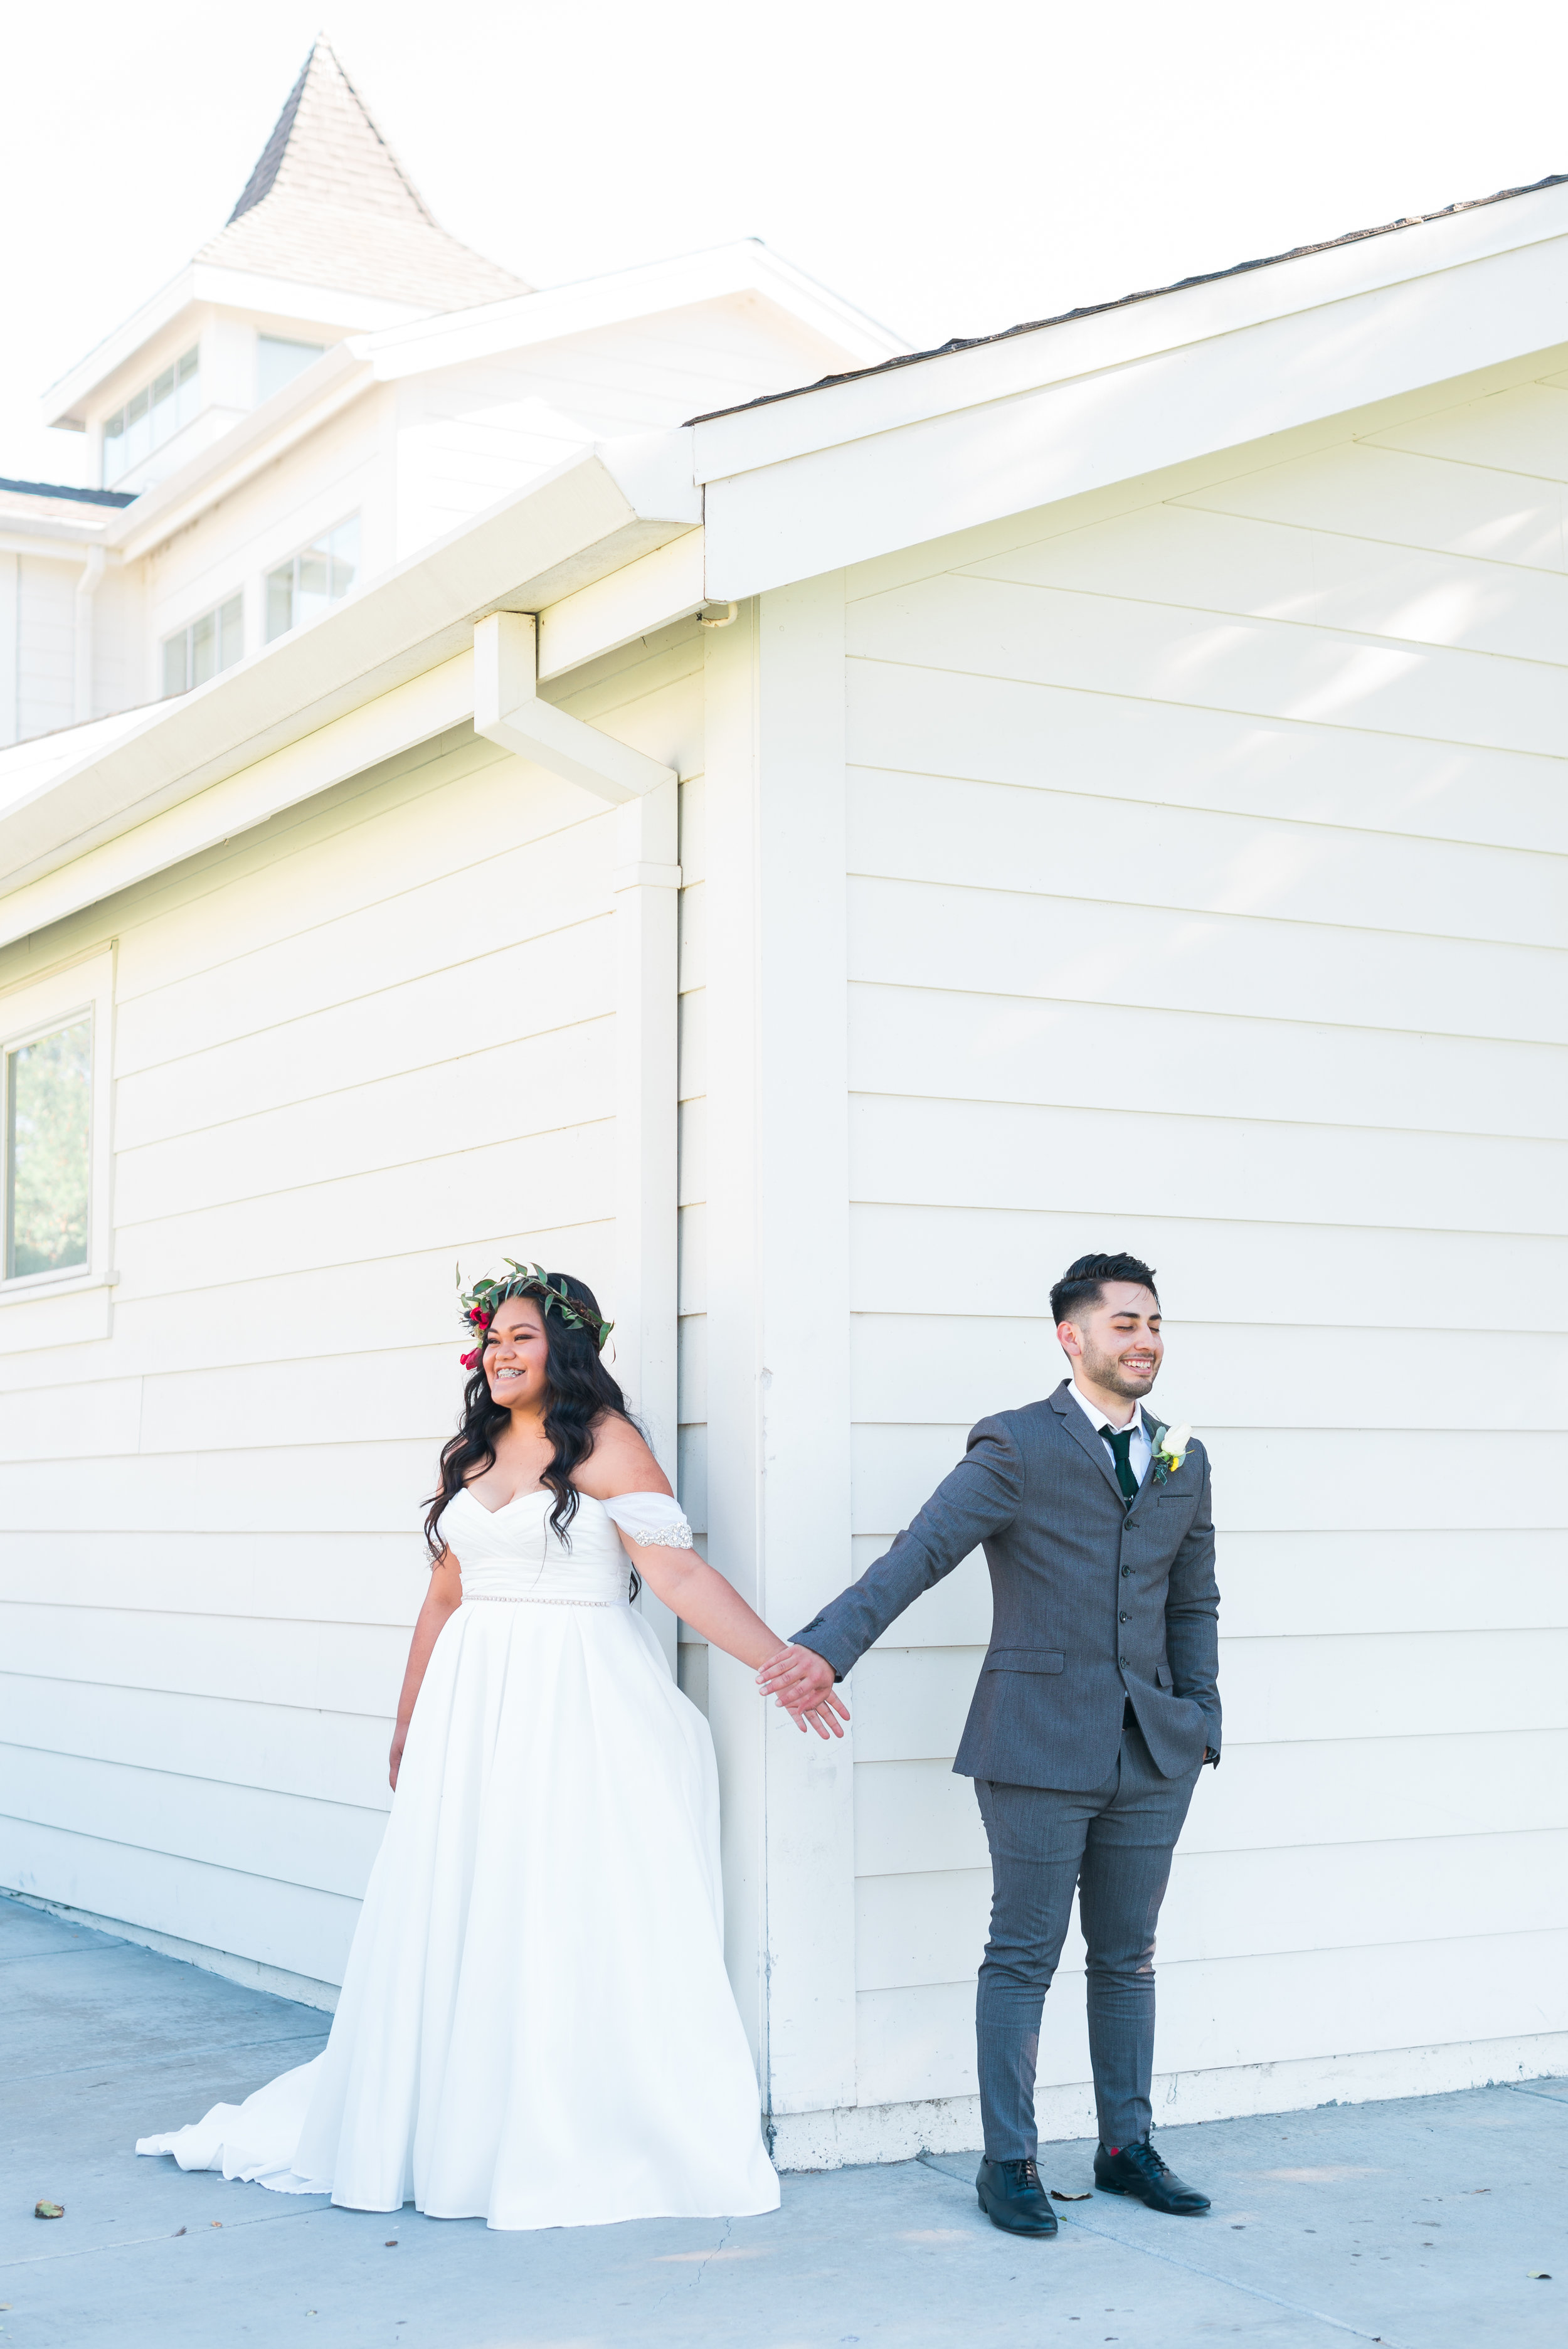 riverside-southern-california-wedding-photographer-ica-images-firstlook-first-prayer